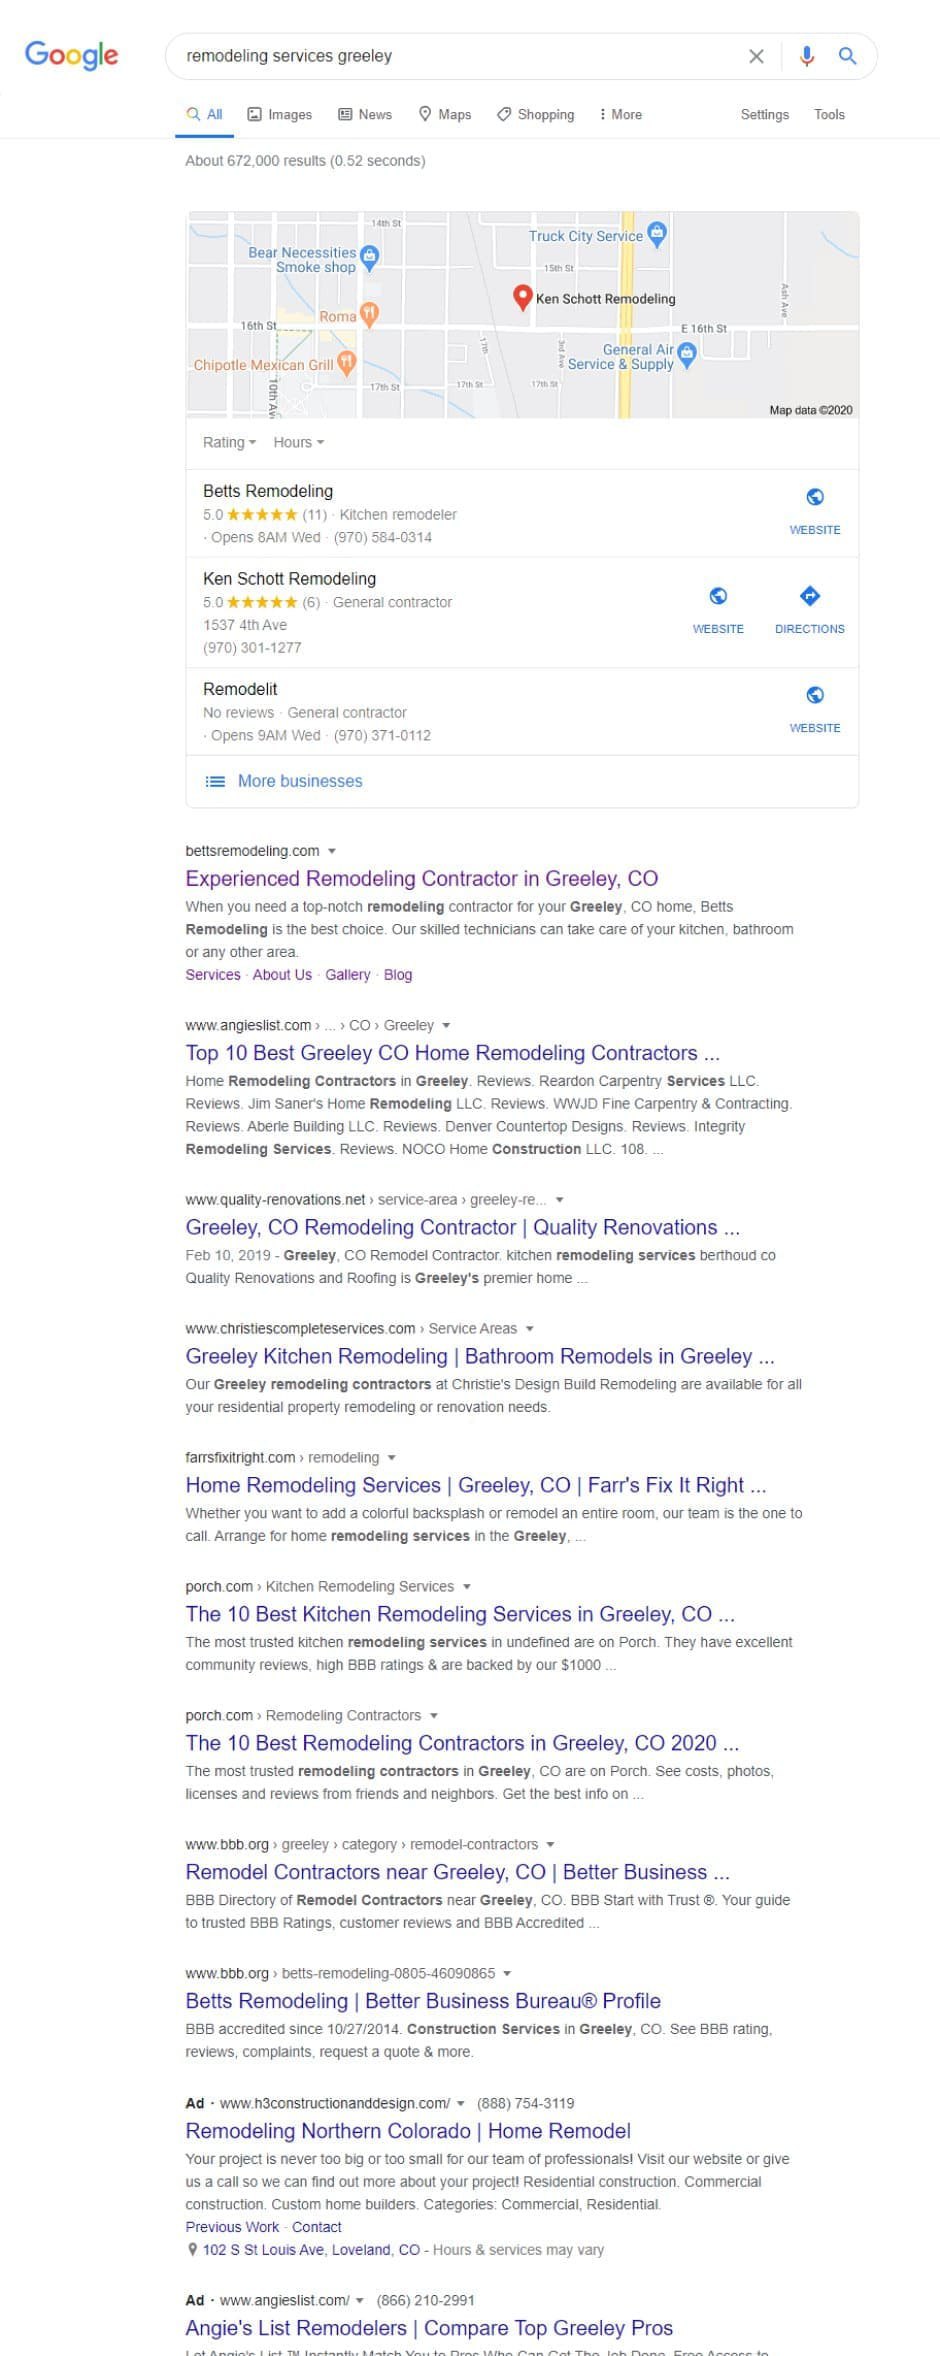 screenshot of the local search results with the key query